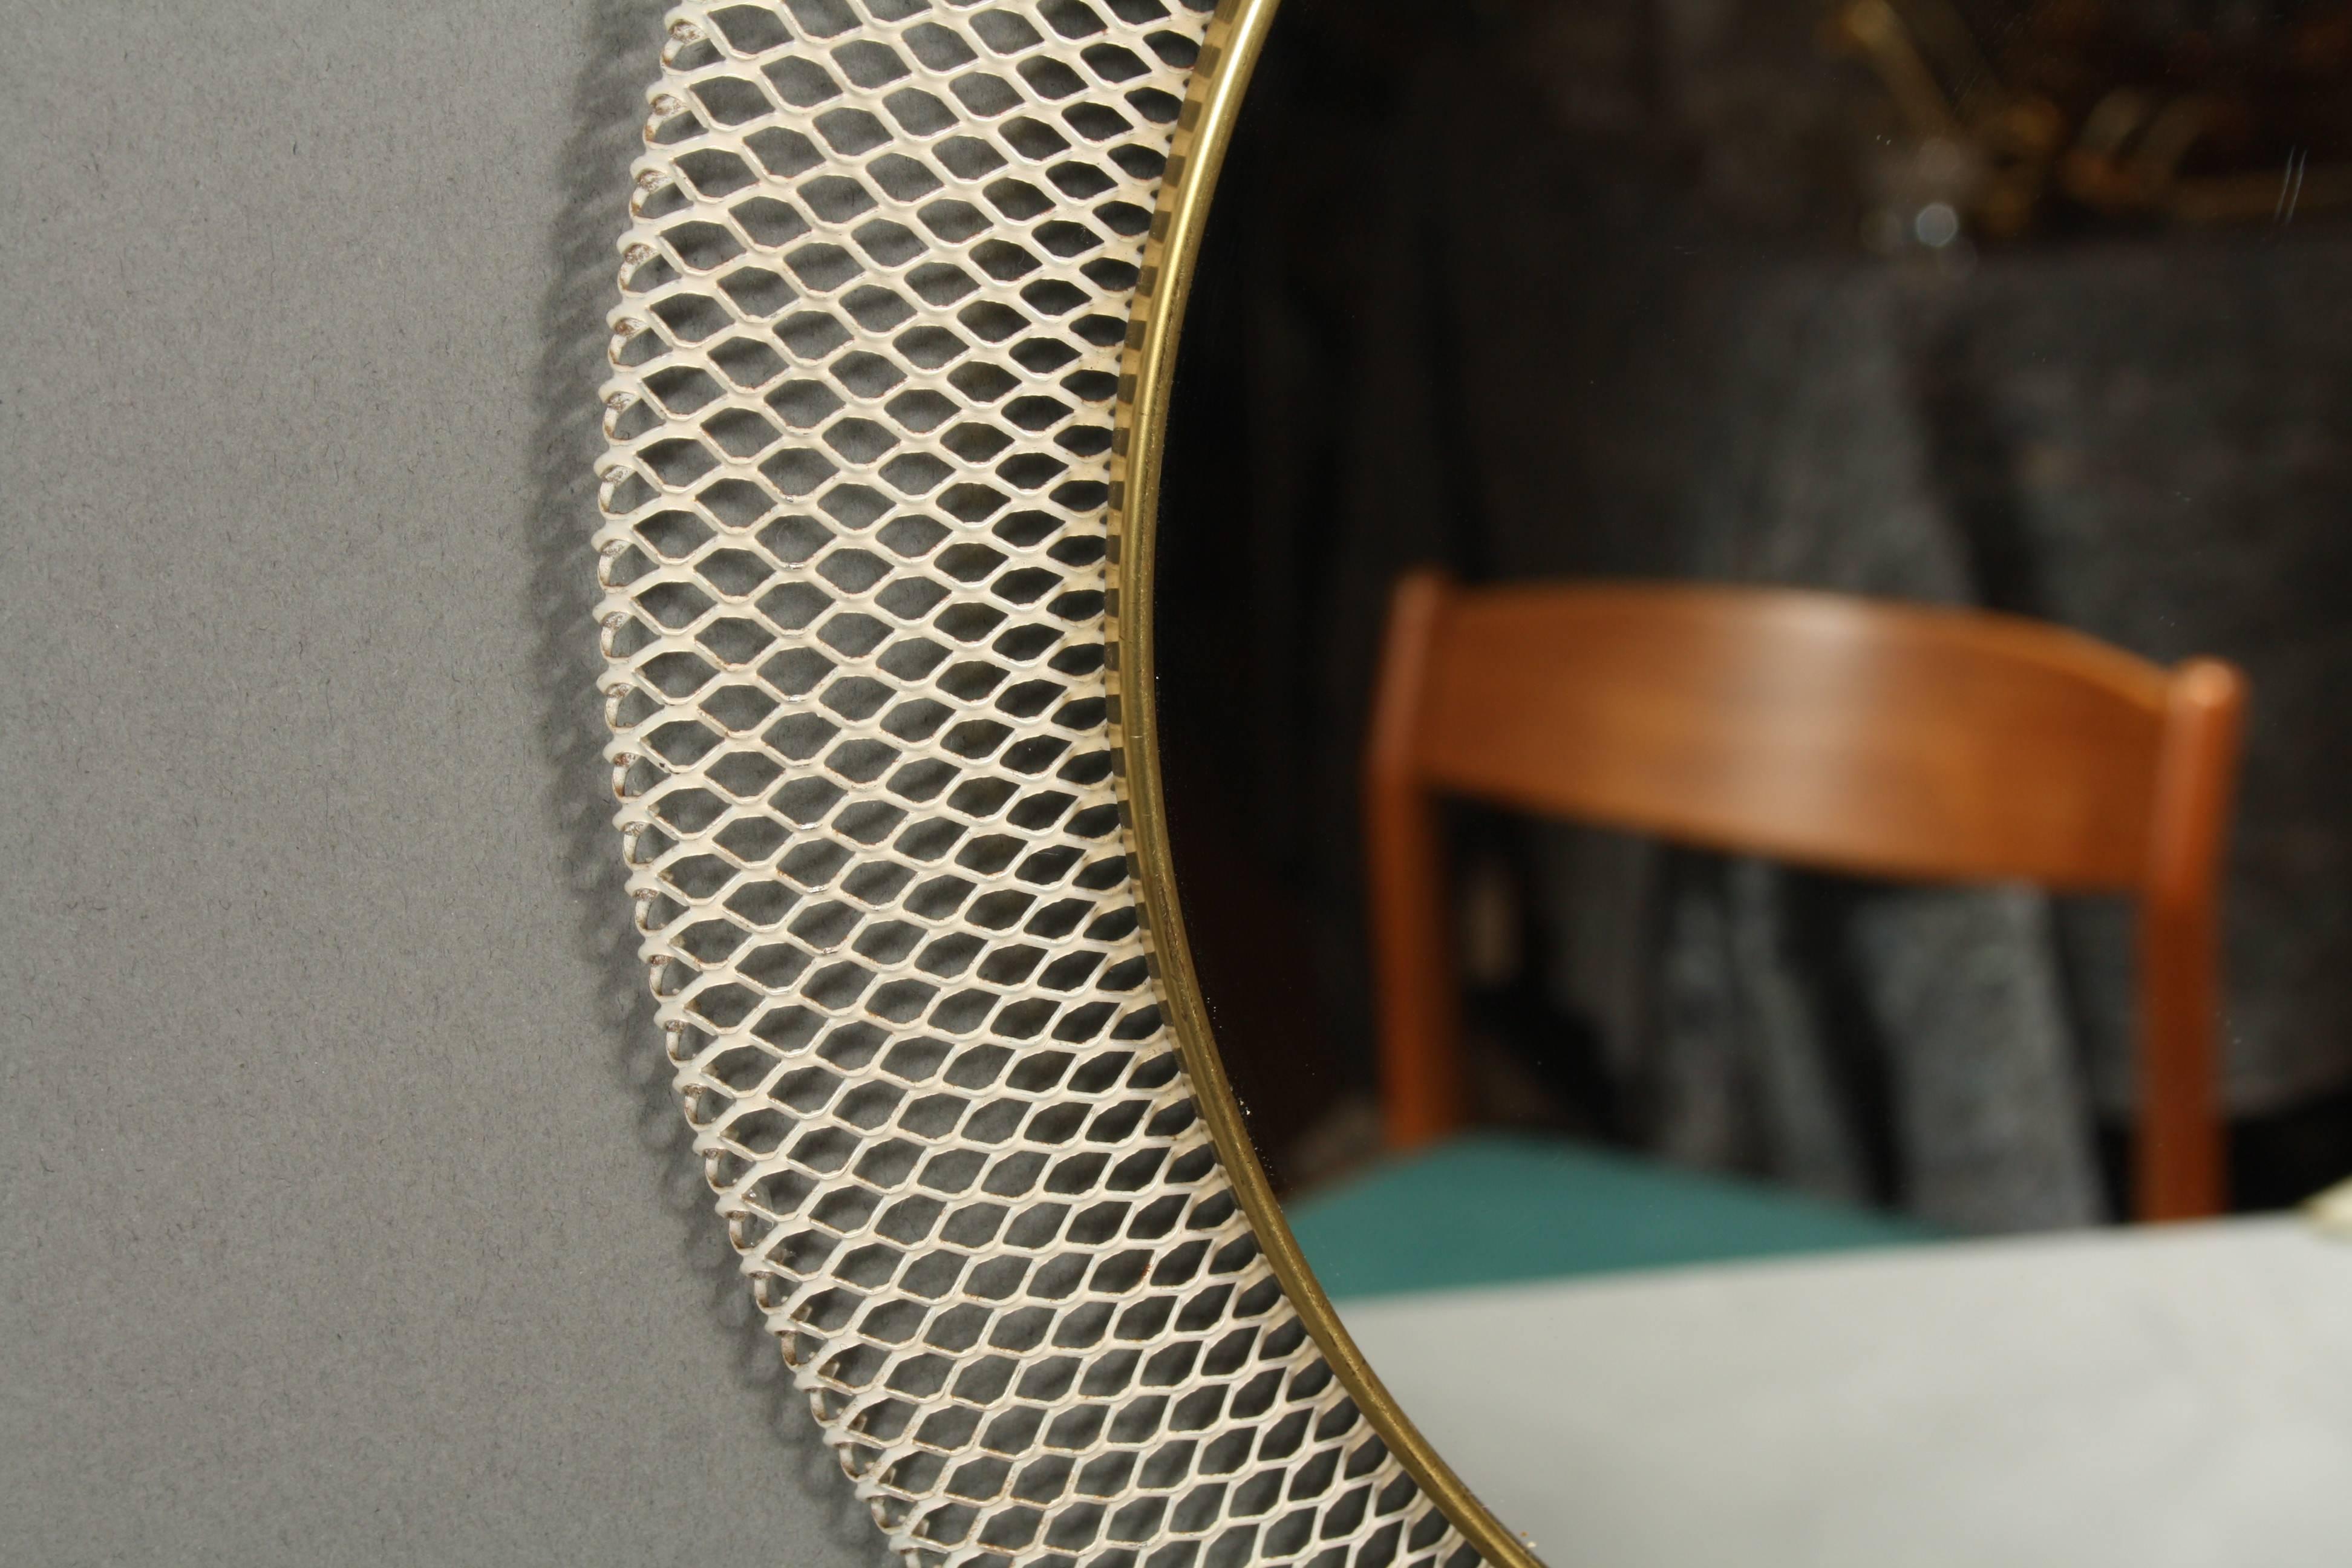 Midcentury Round Mirror White Woven Metallic Frame, 1950s, Germany In Good Condition For Sale In Faarevejle, DK